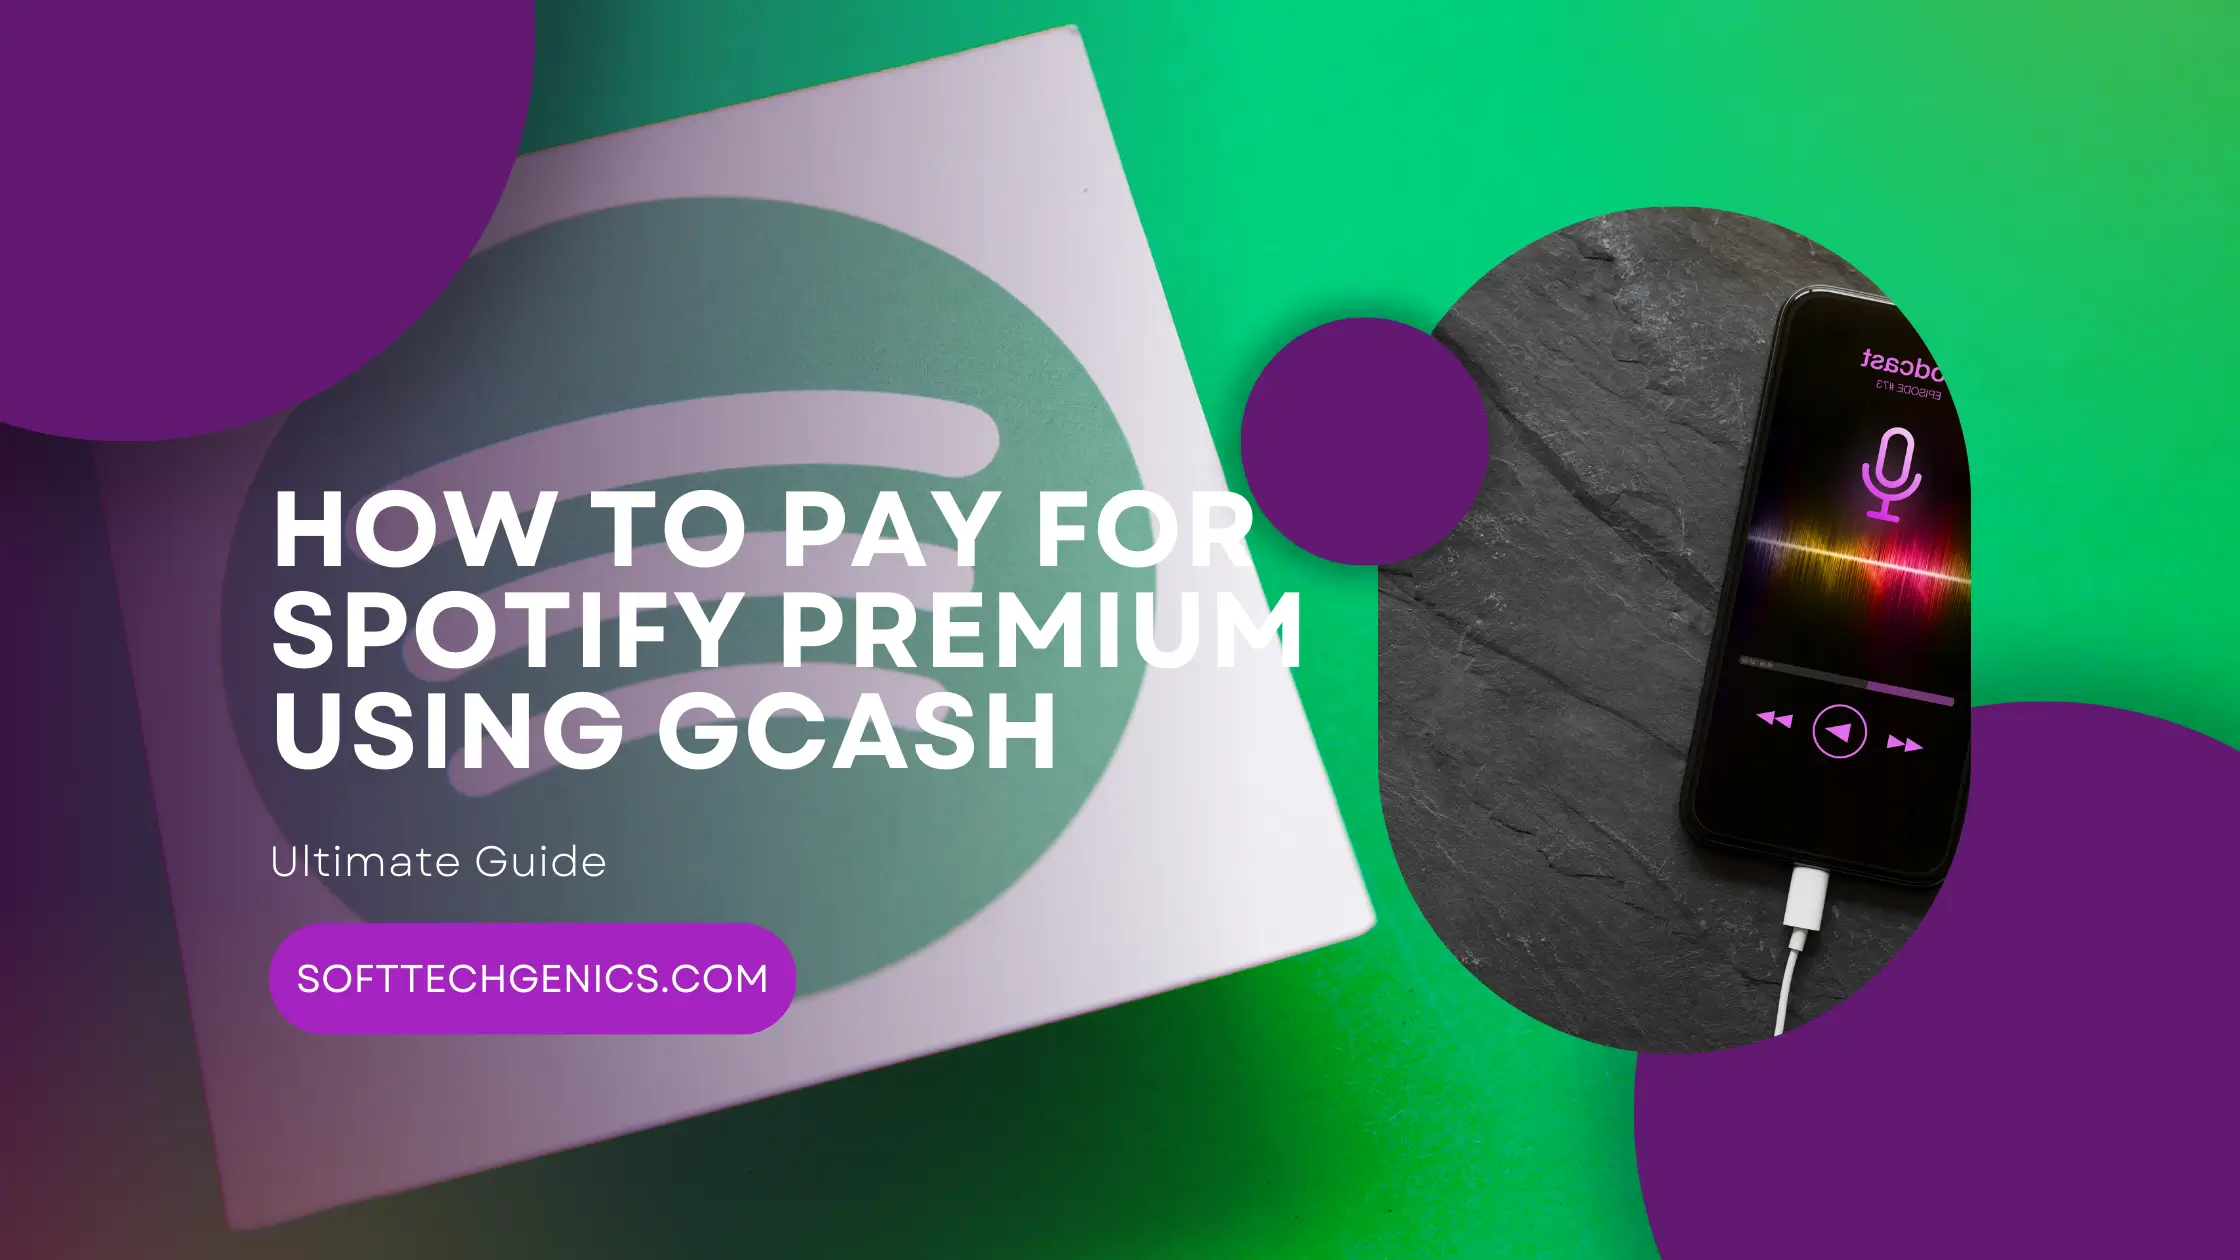 How to Pay for Spotify Premium Using GCash: Easy Guide